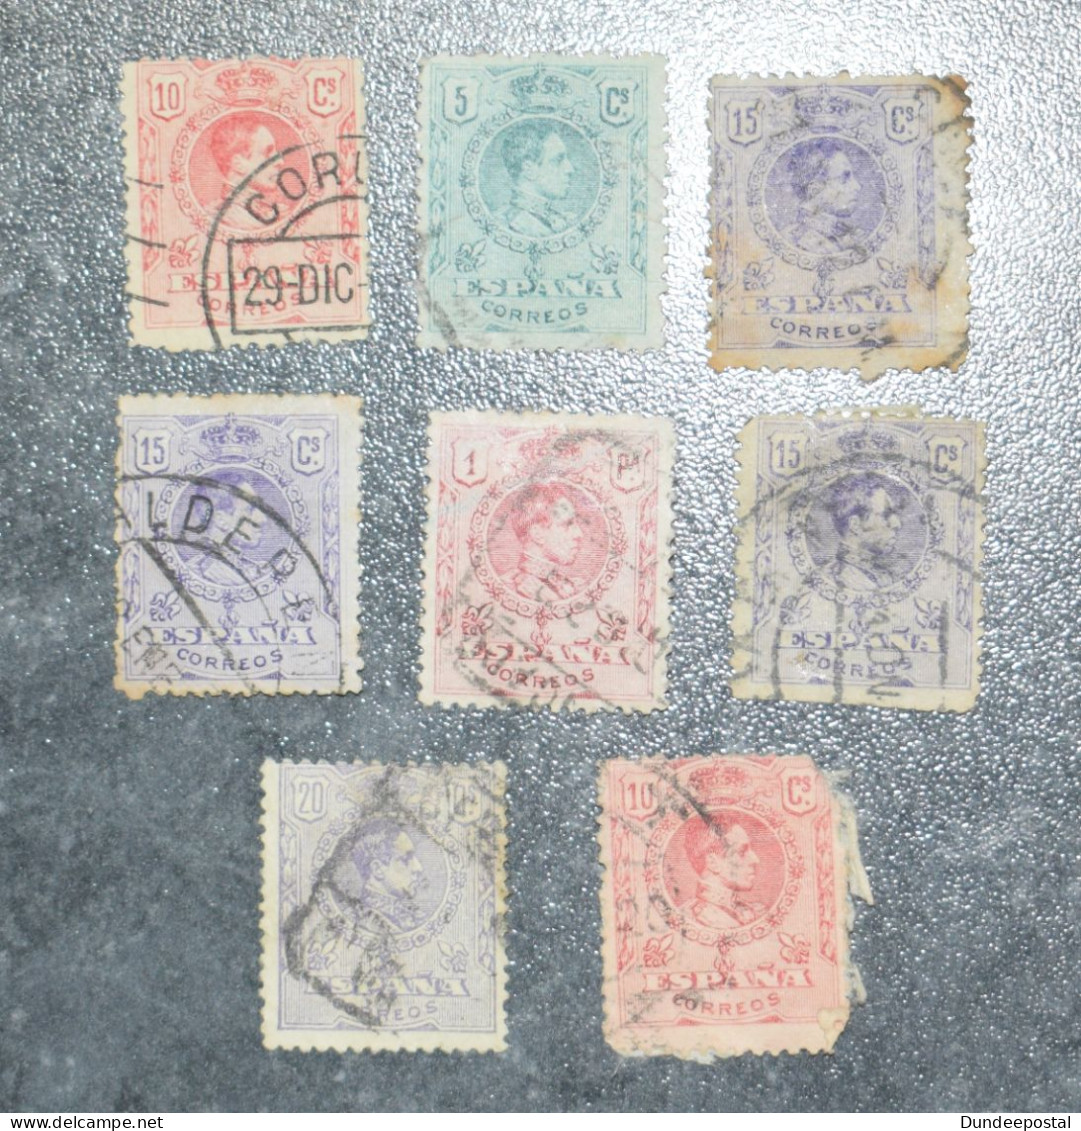 SPAIN  STAMPS  Alfonso Control Numbers  1909  ~~L@@K~~ - Usados